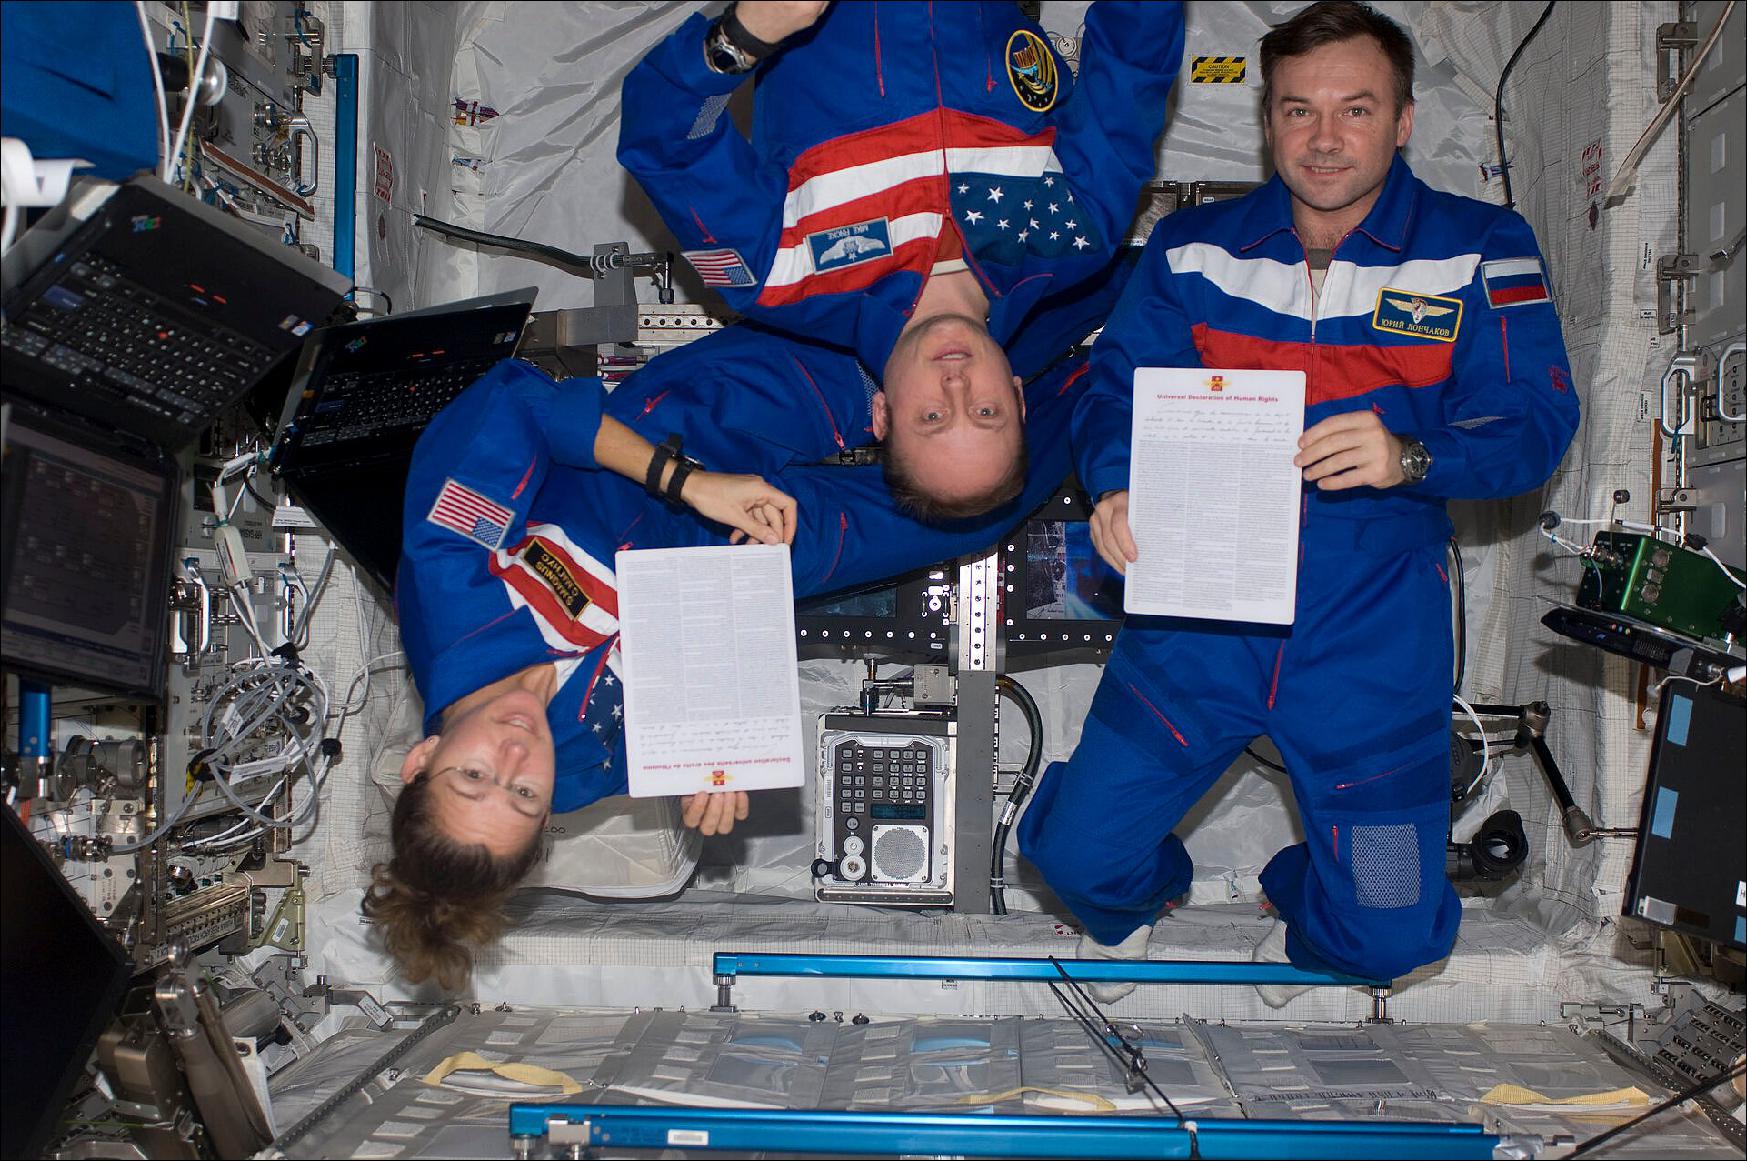 Figure 19: In this image taken in 2008, Expedition 18 crewmembers Sandra Magnus, Mike Fincke and Yury Lonchakov display the Universal Declaration of Human Rights inside the European Columbus laboratory of the International Space Station. This year, as the Station celebrates 20 years of operation, both serve as a reminder of humankind’s ability to come together for a common cause (image credit: NASA)